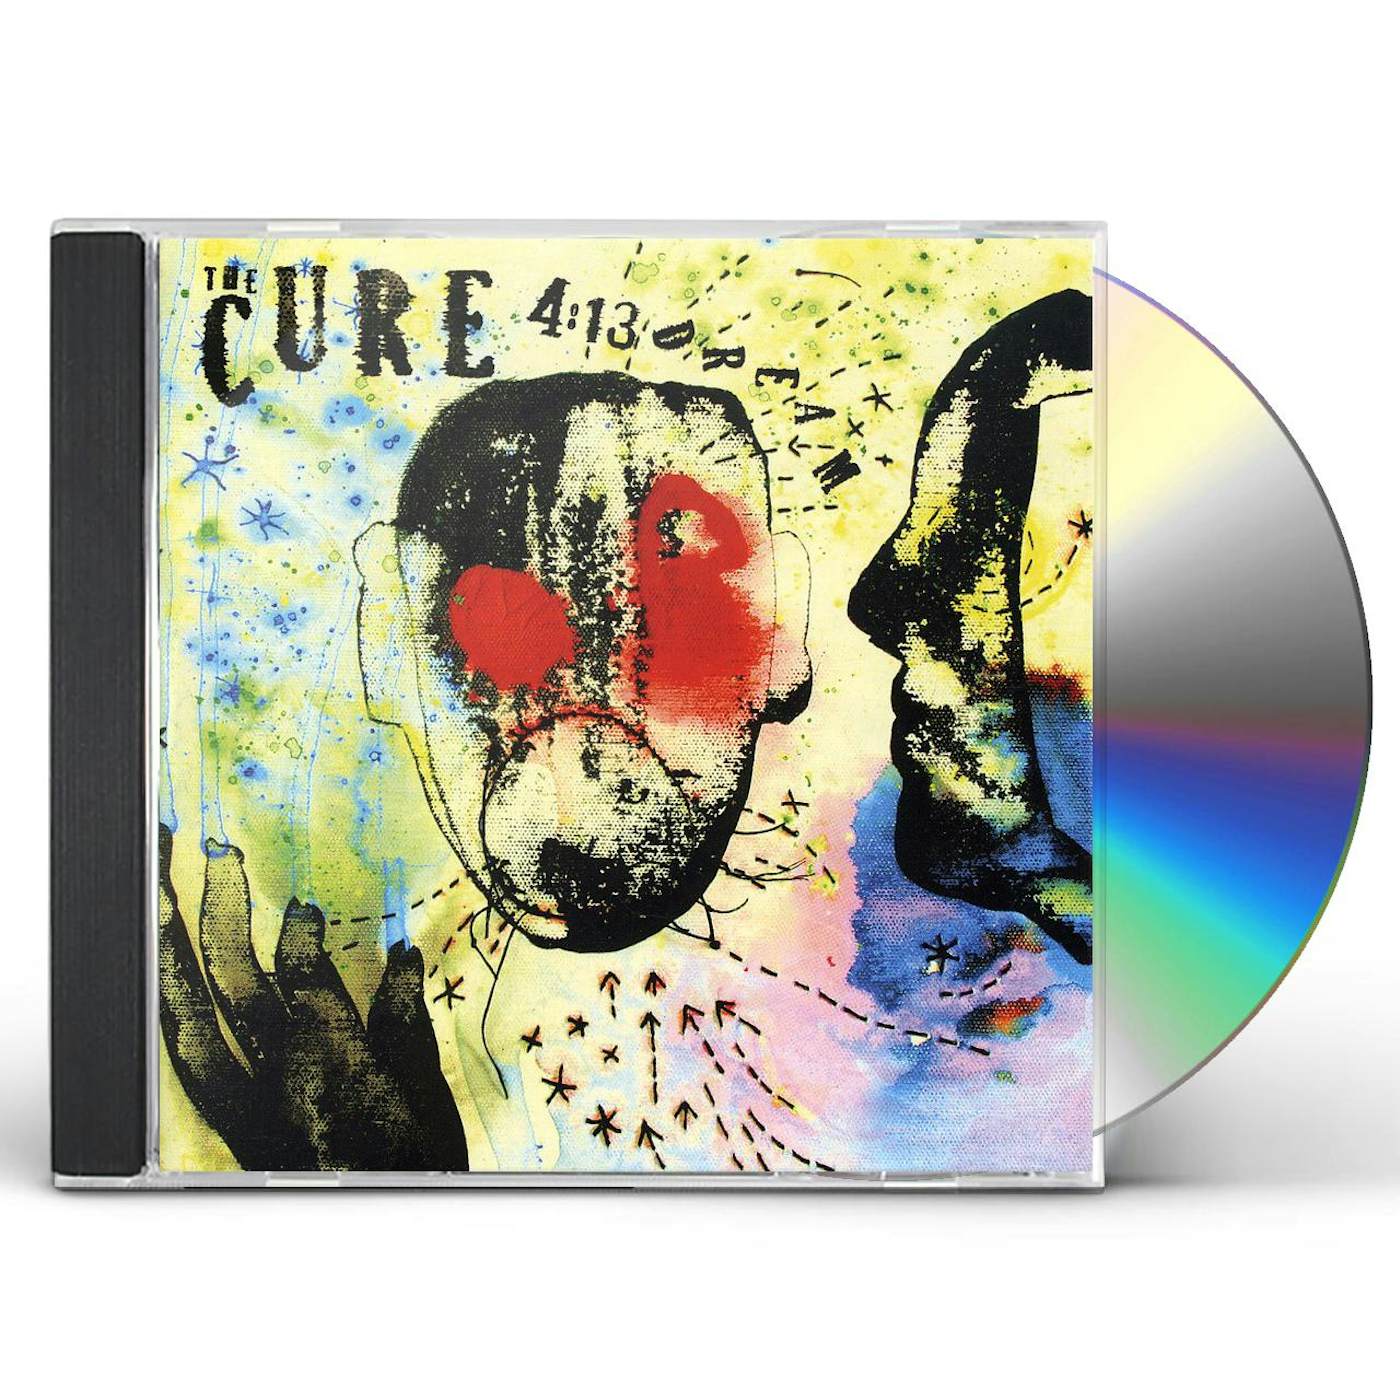 THE CURE - THE HEAD ON THE DOOR ( DELUXE EDITION) 2 CD +++++++++++NEW+  600753270127 